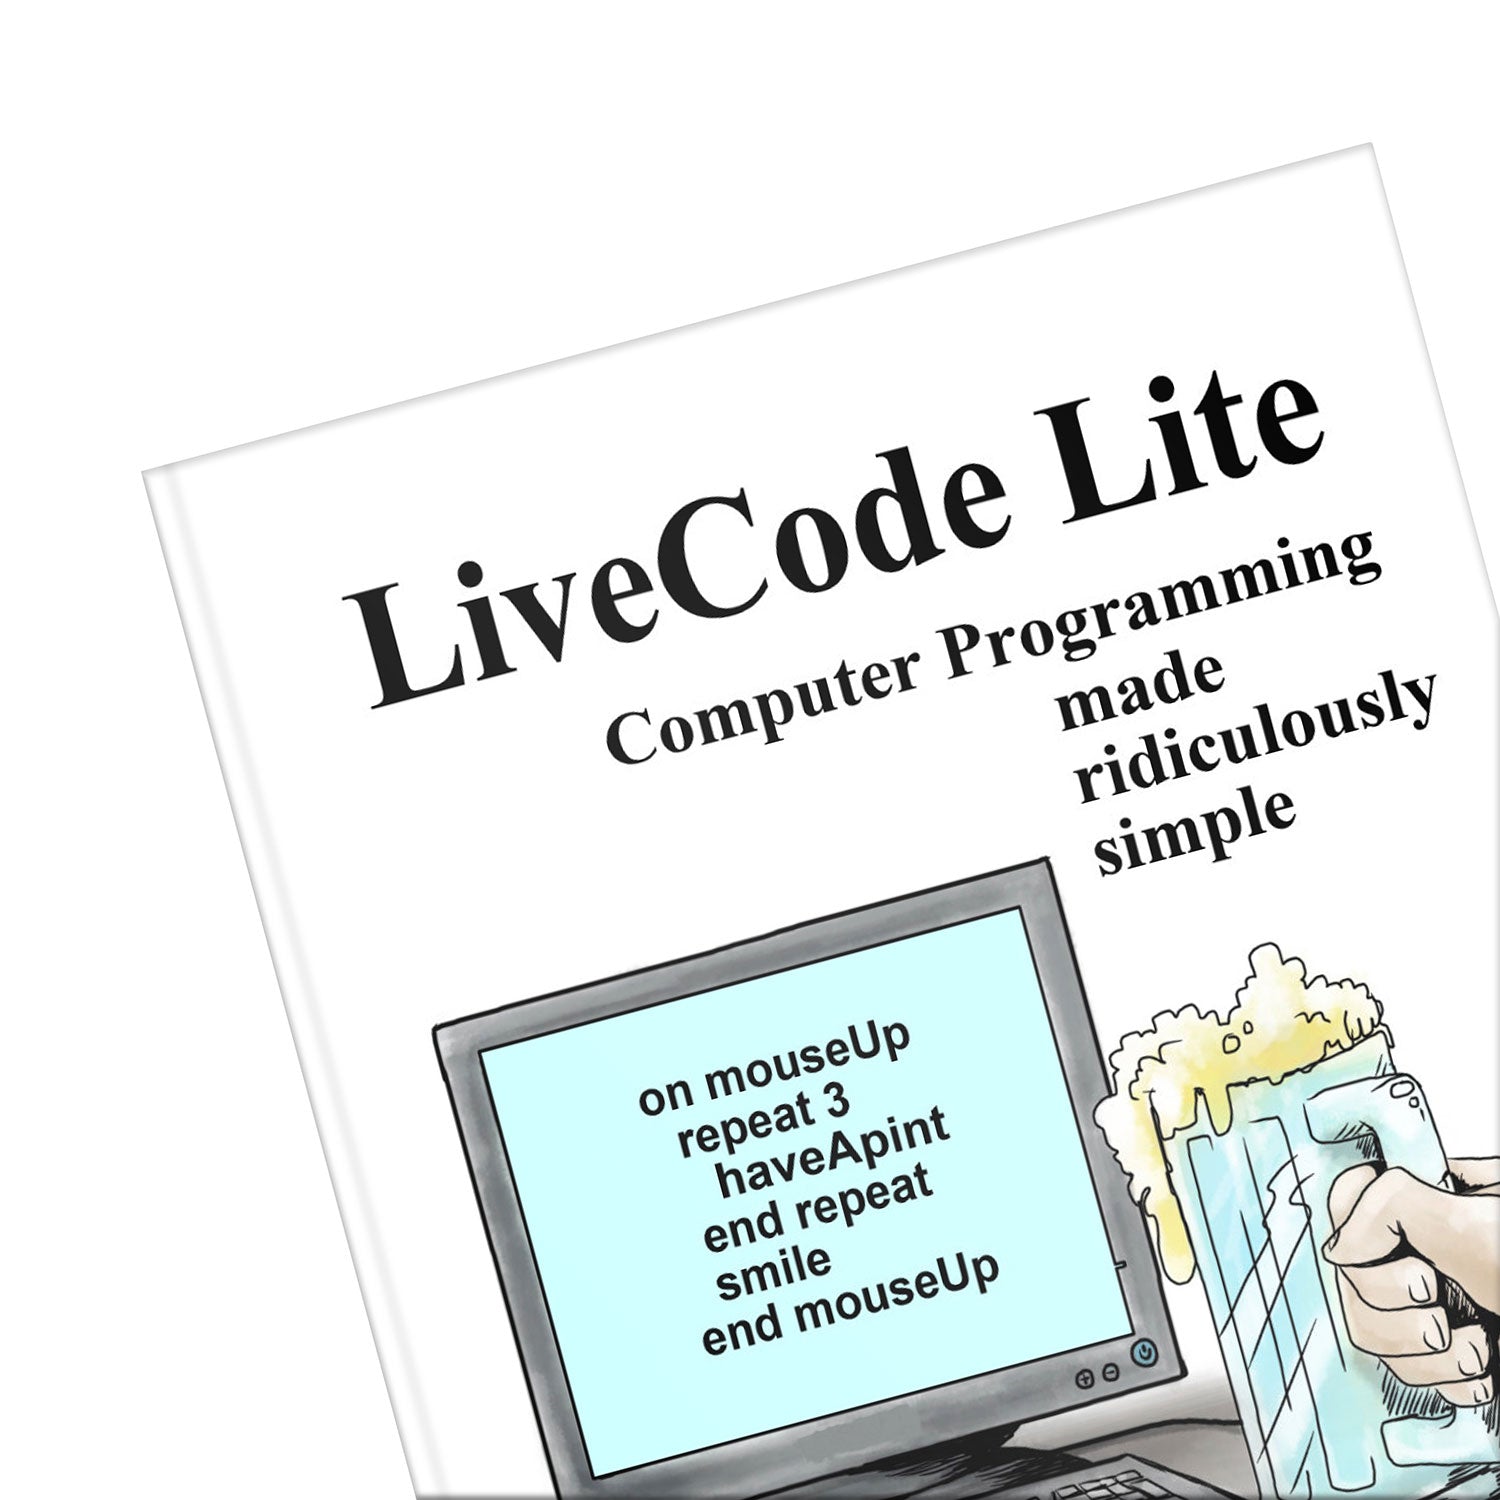 LiveCode Lite: Computer Programming Made Ridiculously Simple